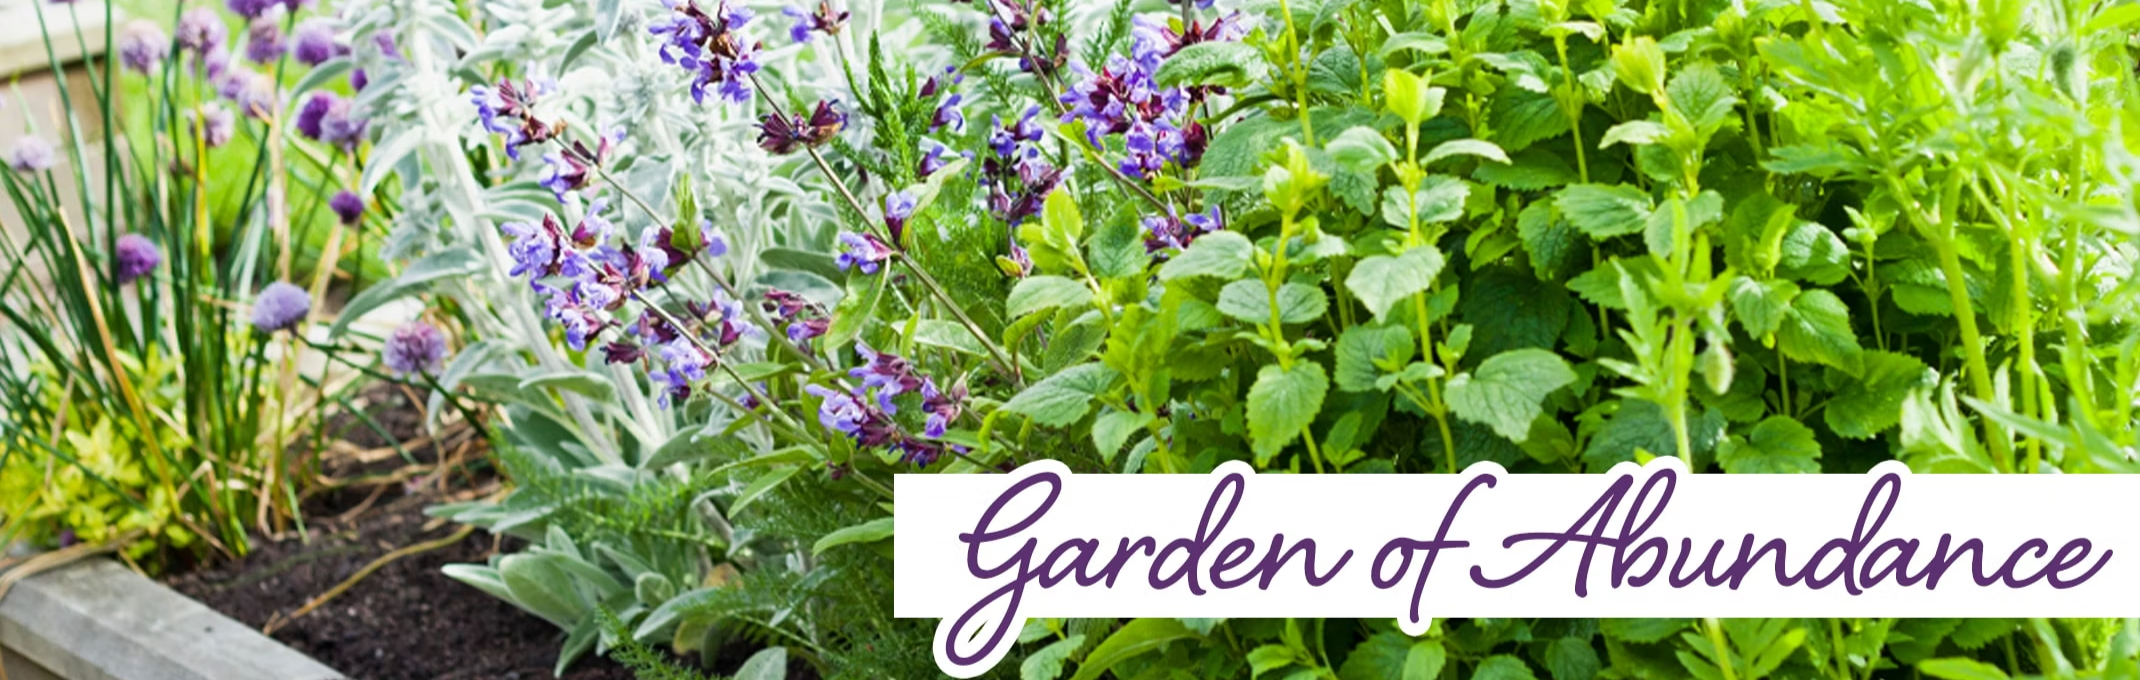 garden of abundance salvia, chives, catmint and lavender